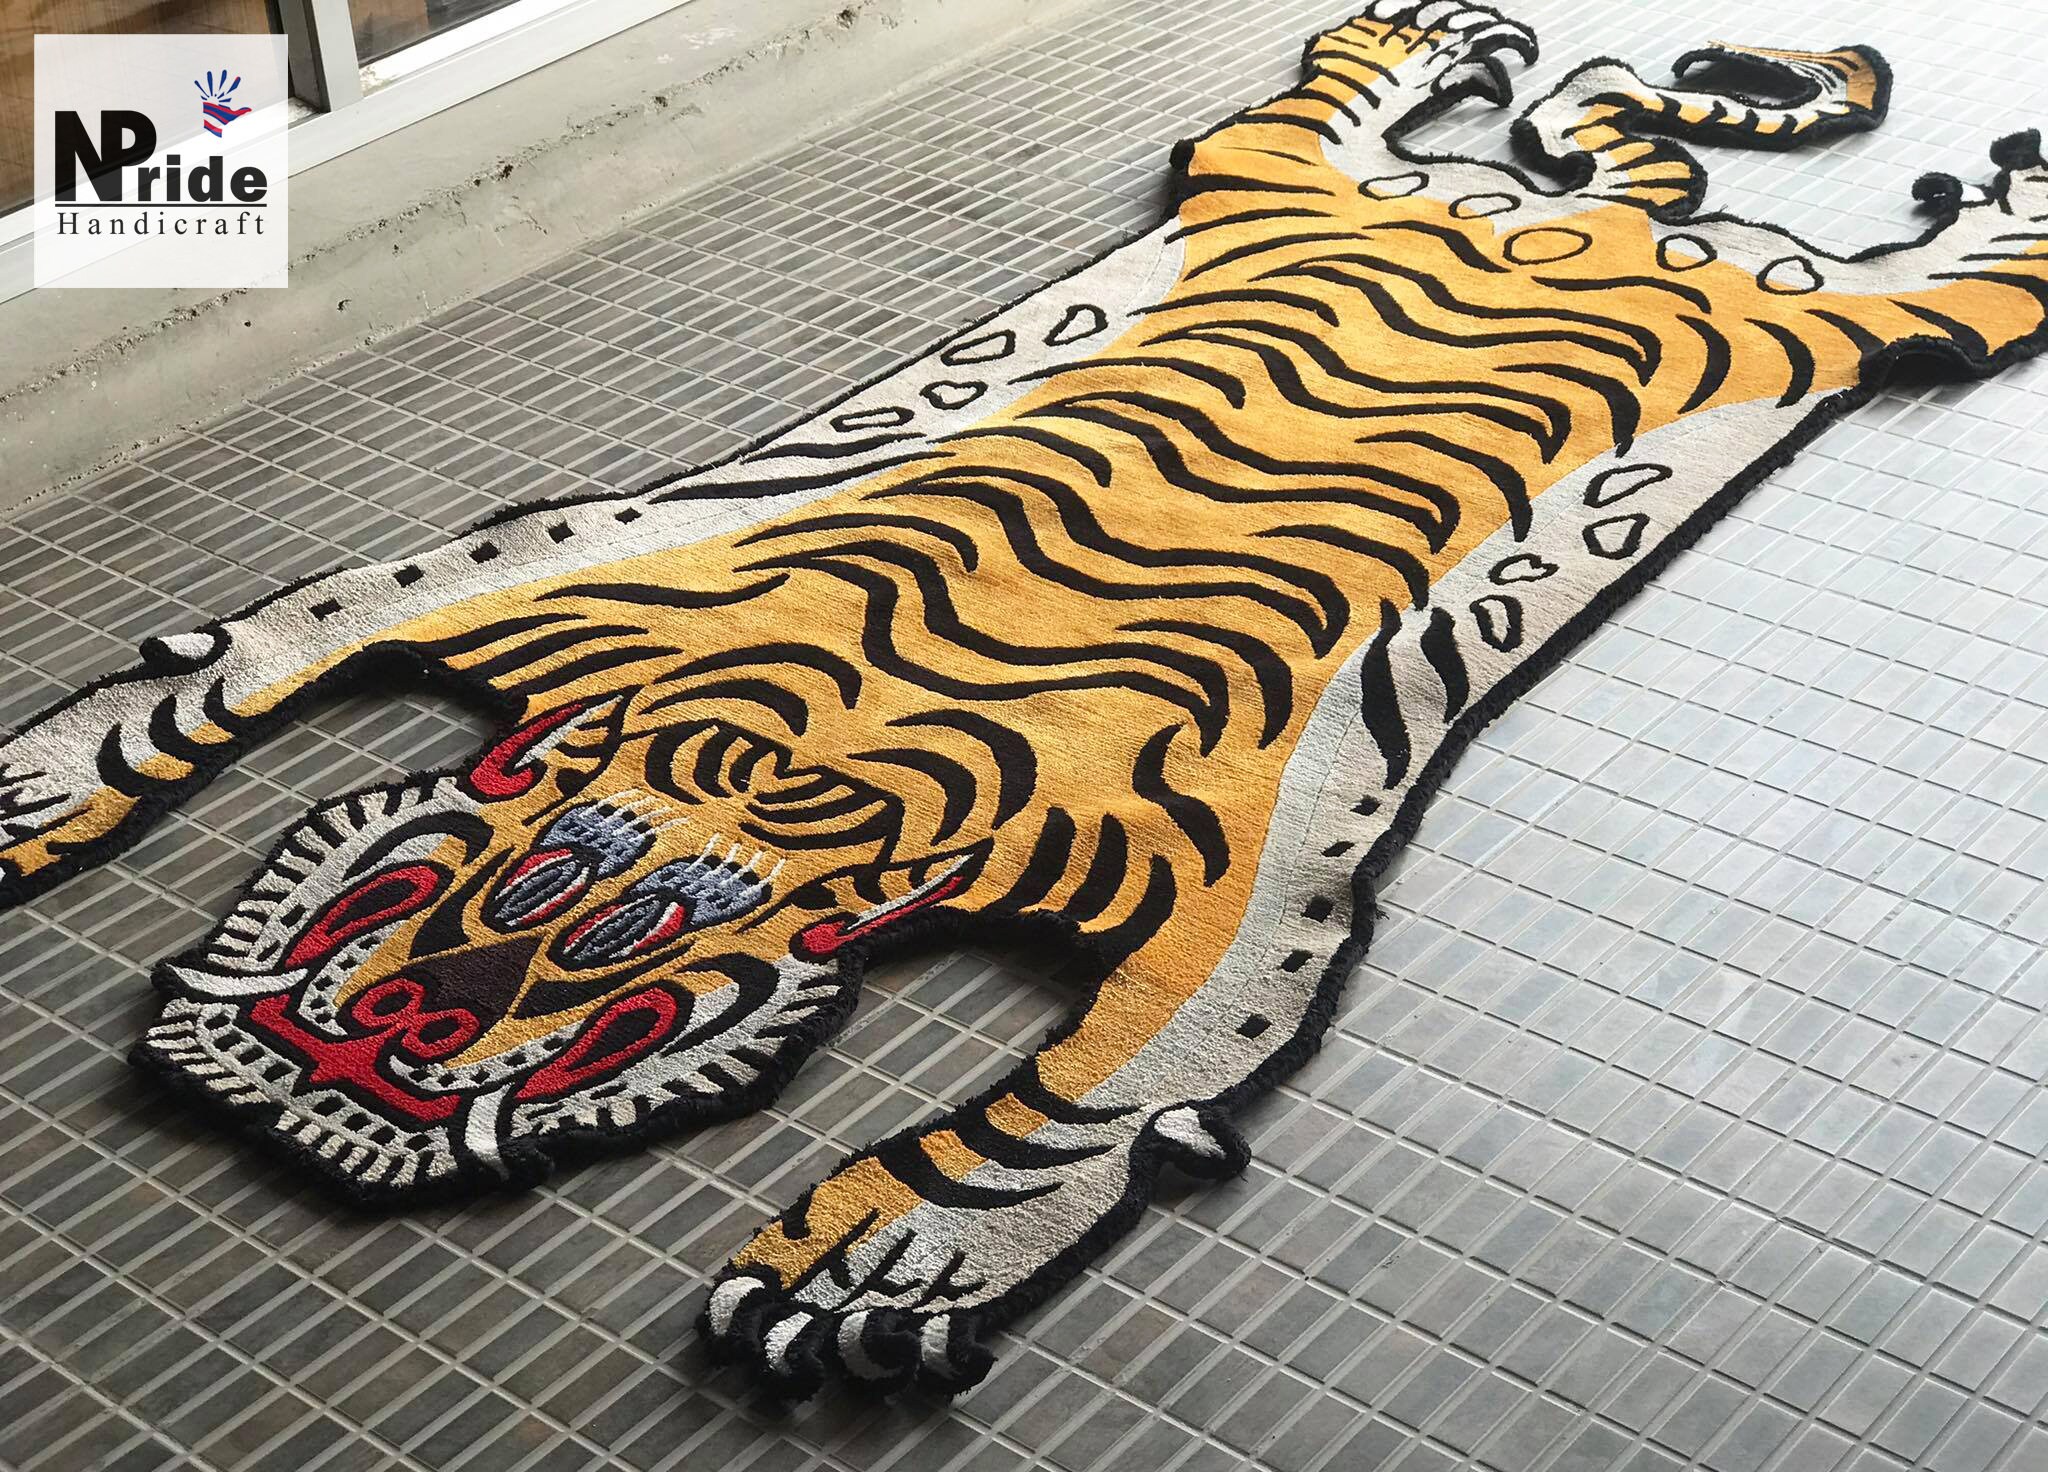 Handknotted Swirling Tiger Rug, 3'6x5